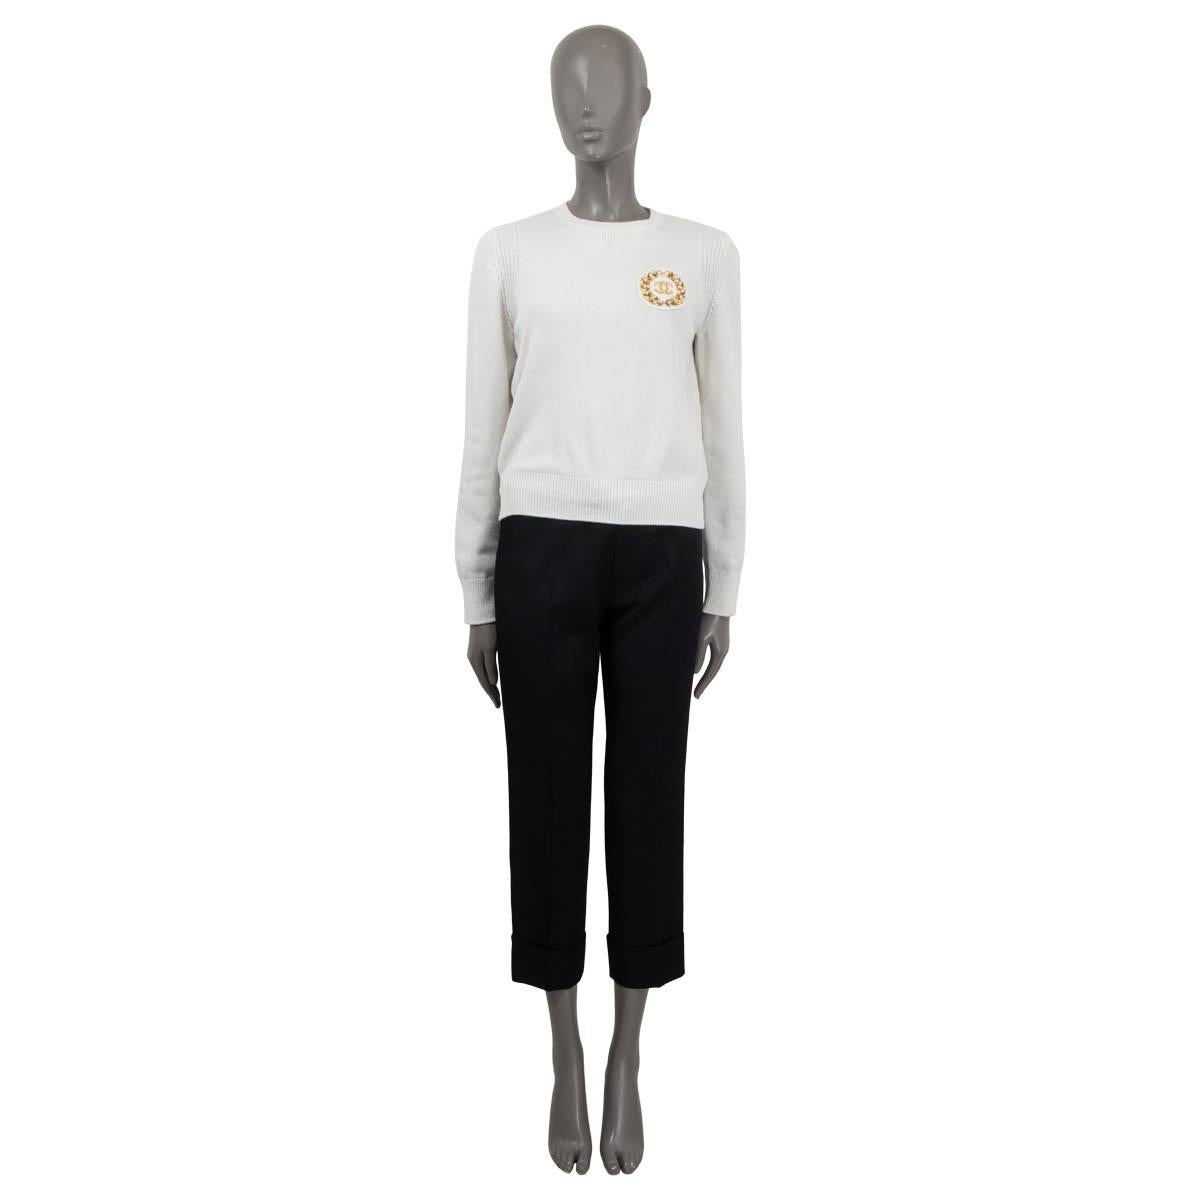 100% authentic Chanel 2020 Rue Cambone long sleeve sweater in off-white cashmere (97%), polyamide (2%) and polyurethane (1%). Features a gold and pearl embellished emblem on the chest. Unlined. Has been worn and is in excellent